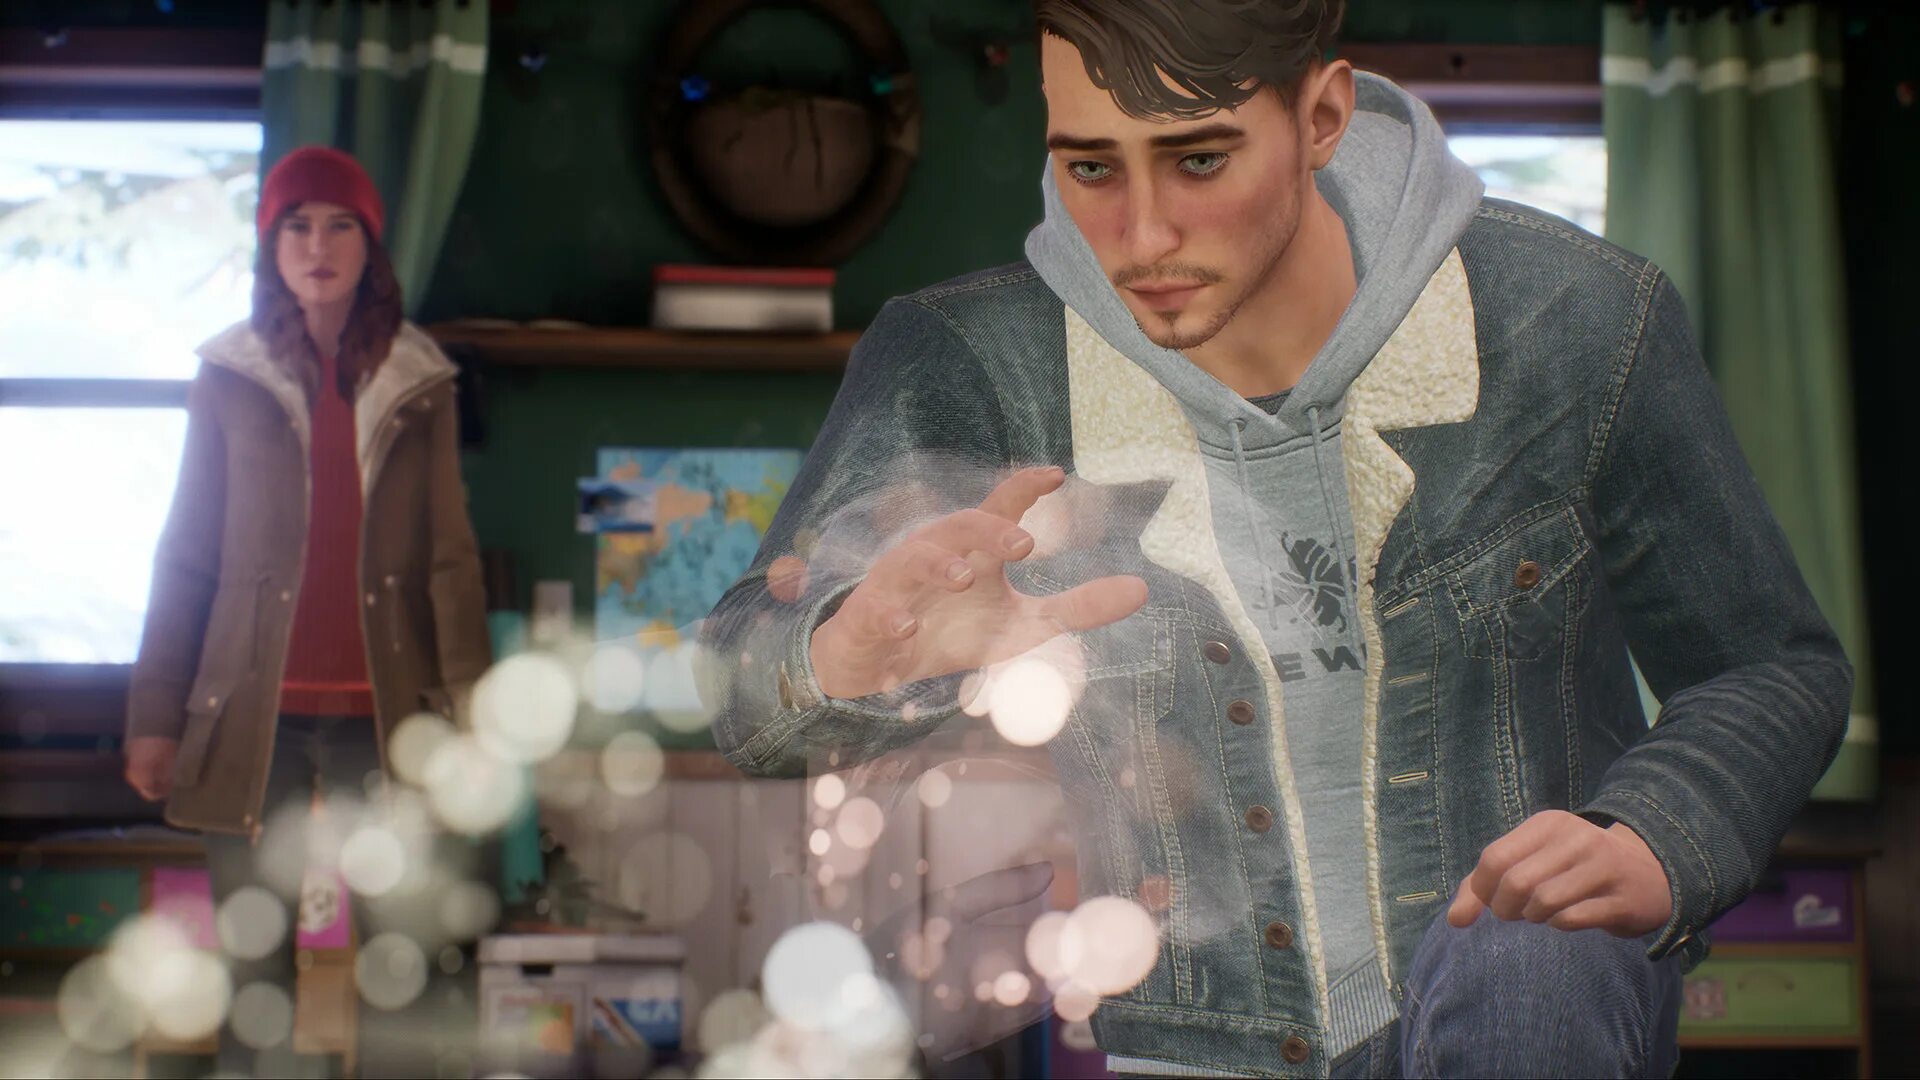 Tell my why игра. Tell me why игра Dontnod. Tell me why (2020). Tell me why to do